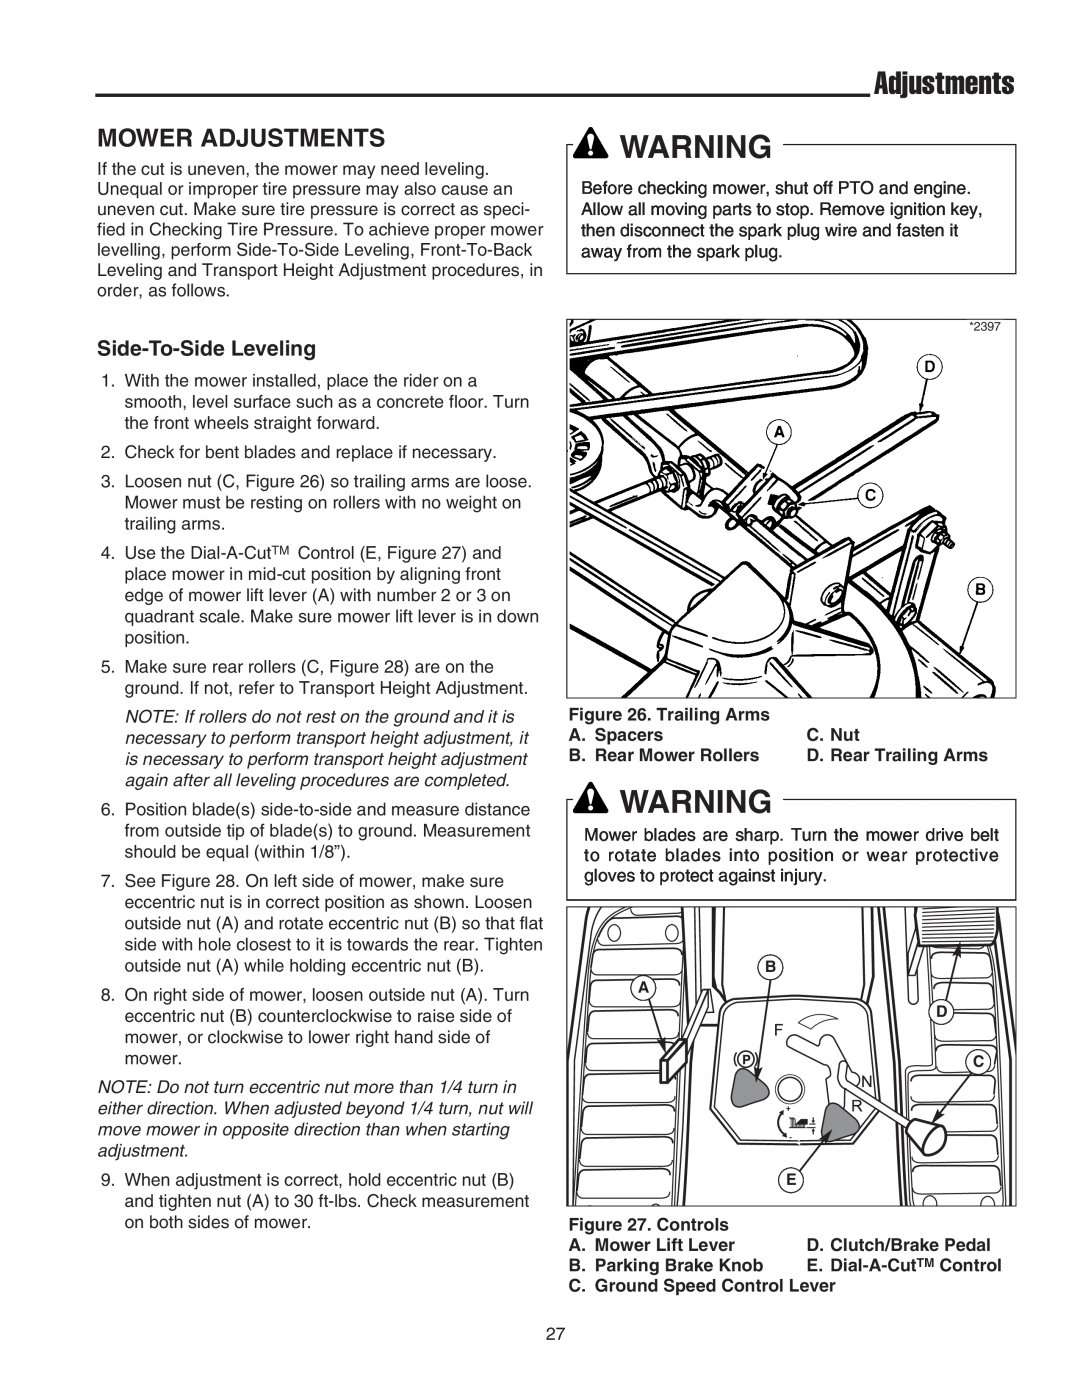 Snapper 400 Series manual Mower Adjustments, Side-To-SideLeveling 